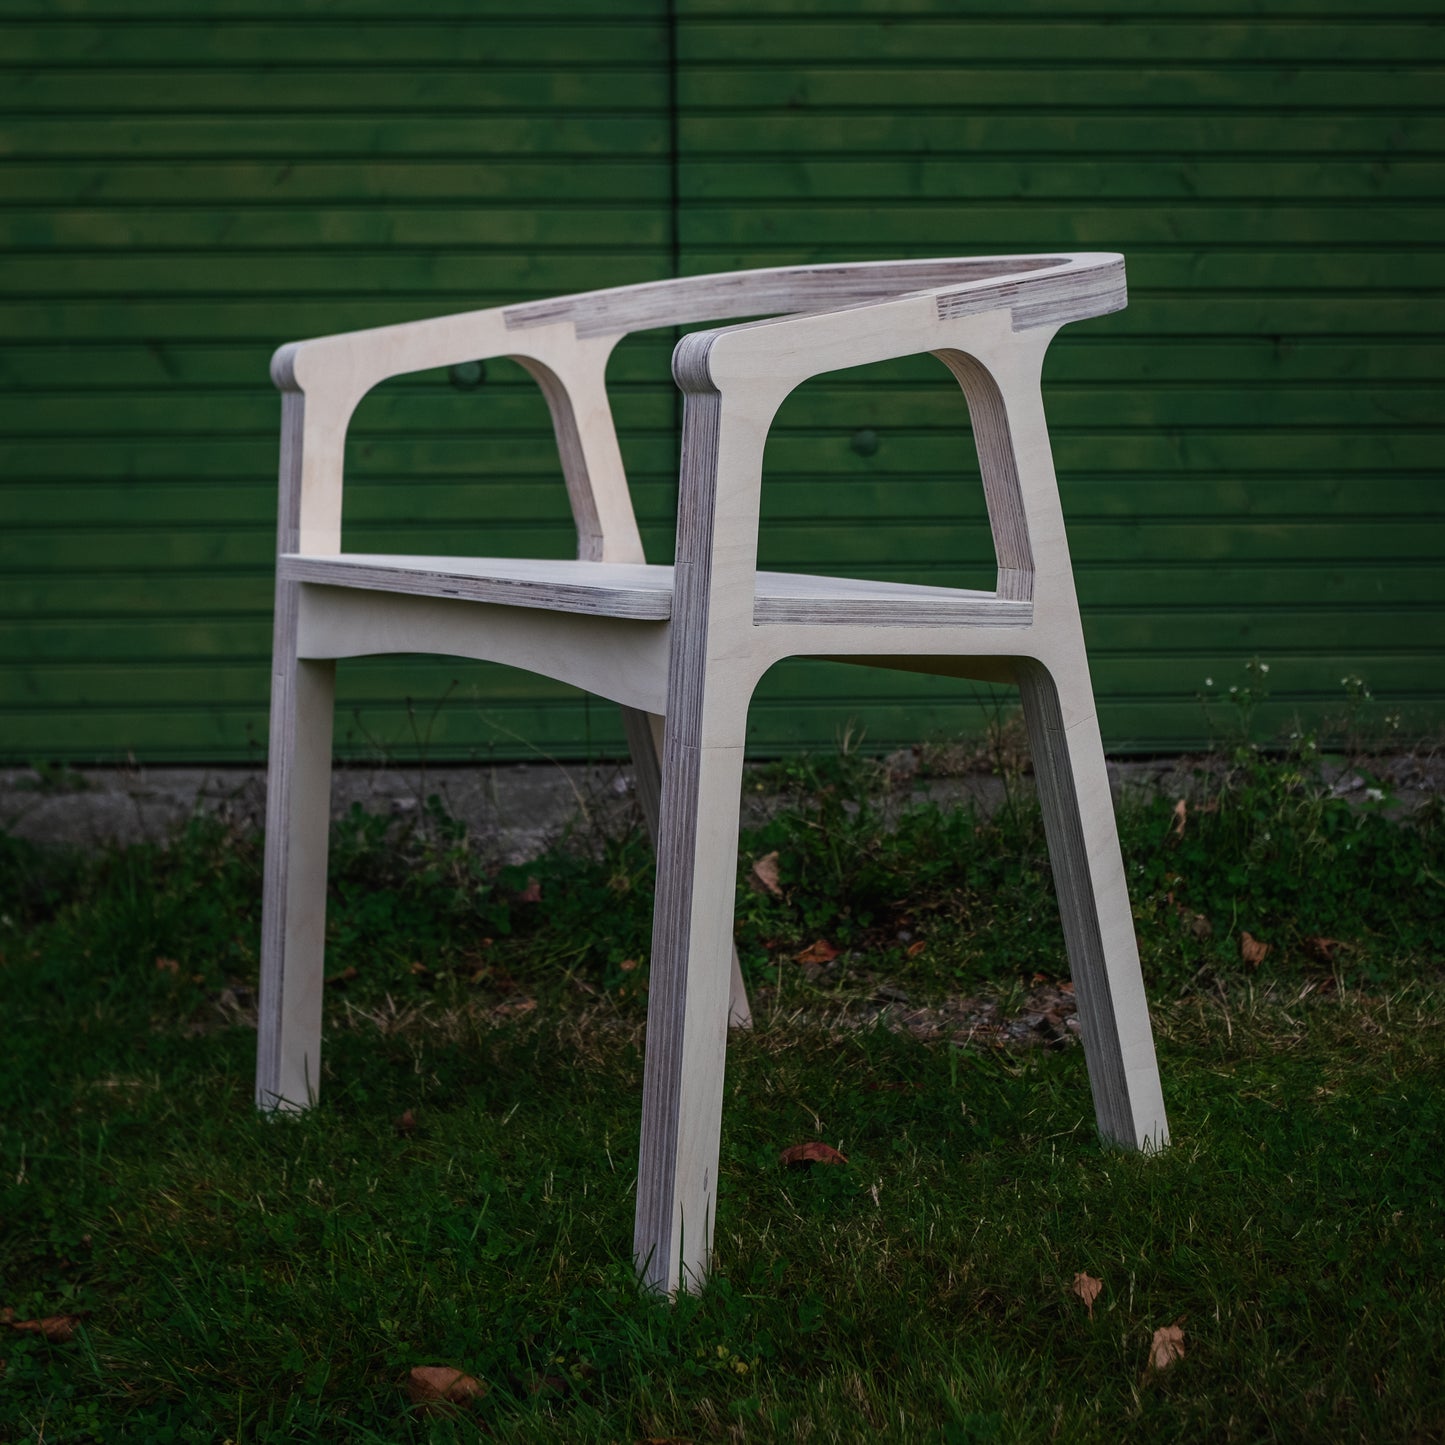 The Plywood Chair